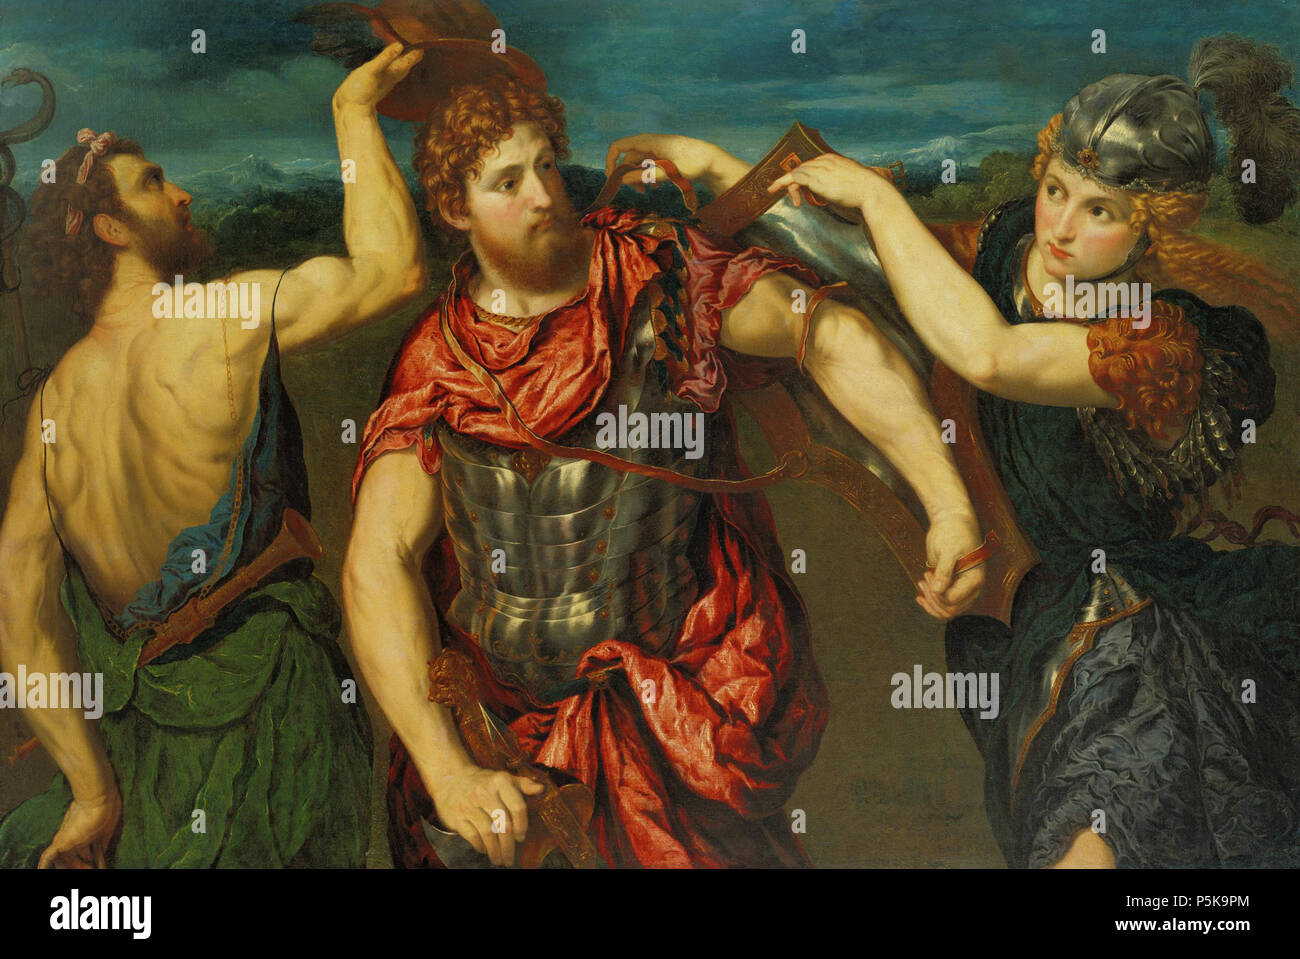 N/A. TITLES Perseus Armed by Mercury and Minerva (Proper) ARTIST Paris Bordon, Italy, Treviso 1500-1571 Venice MEDIUM oil on canvas DIMENSIONS 40 3/4 x 60 3/8 in. (103.5 x 153.4 cm) �frame: 52 3/8 × 71 7/8 × 3 1/4 in. (133 × 182.6 × 8.3 cm) CREDIT LINE Gift of the Samuel H. Kress Foundation, 1961.117 OBJECT NAME painting CLASSIFICATION Paintings . 22 January 2017 (upload date). YukioSanjo 224 Bordon - Perseus Armed by Mercury and Minerva - Stock Photo